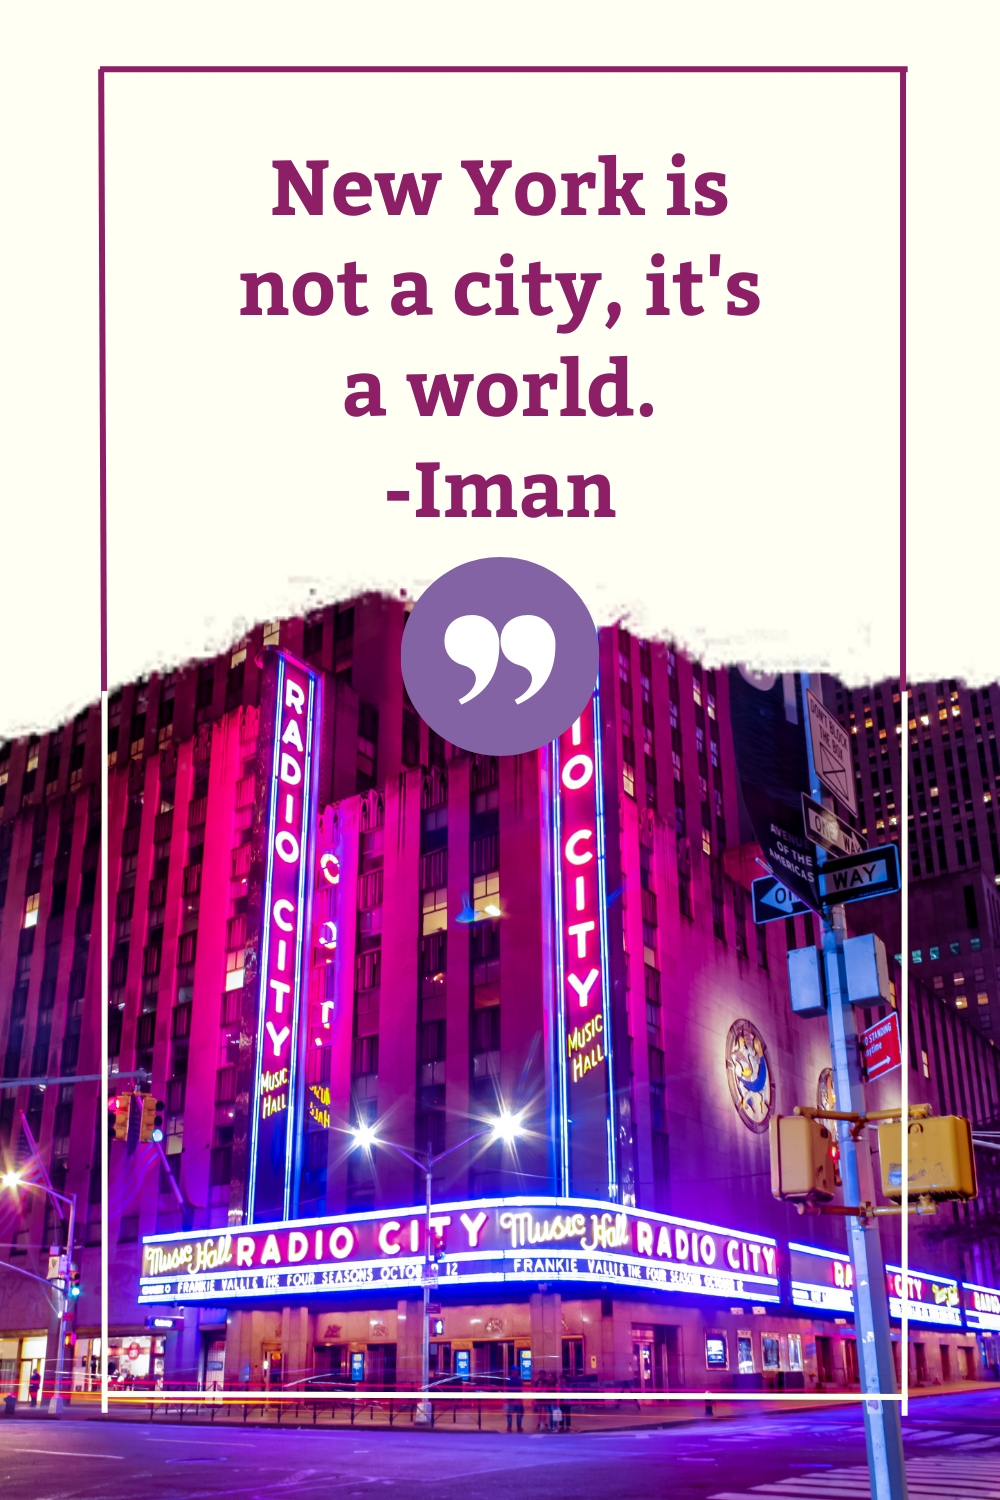 Text says: New York is not a city, it's a world. Image shows a building with lots of pink and purple lights. Sign says Radio City